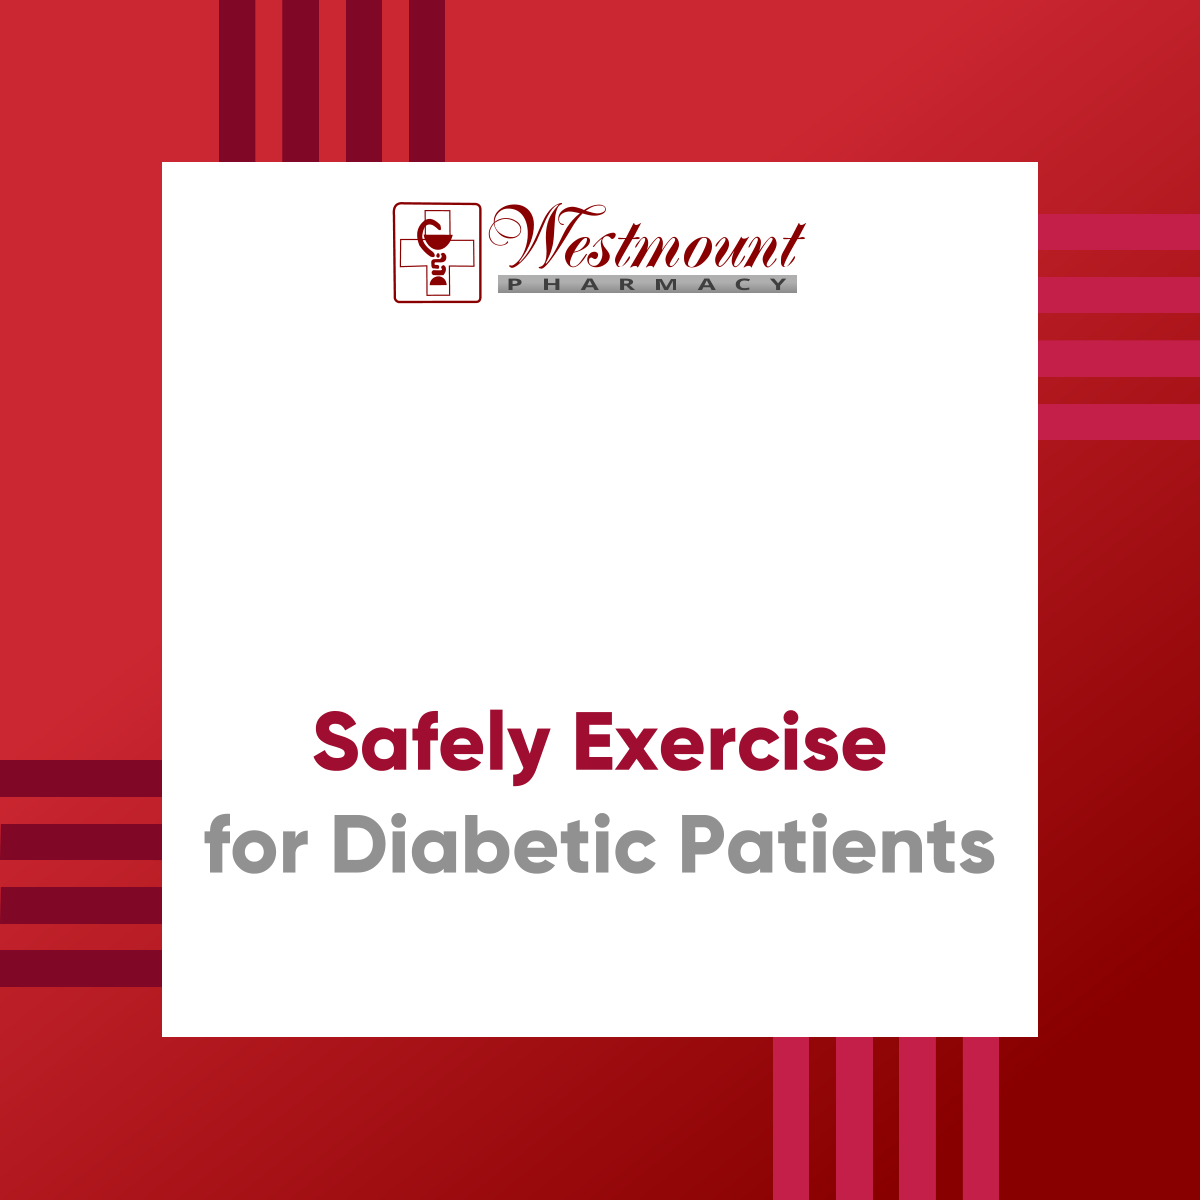 Exercise is vital for diabetic patients. Discover safe and effective ways to incorporate physical activity into your routine through our diabetes management.

#DiabetesManagement #PharmacyServices #WestHamiltonON